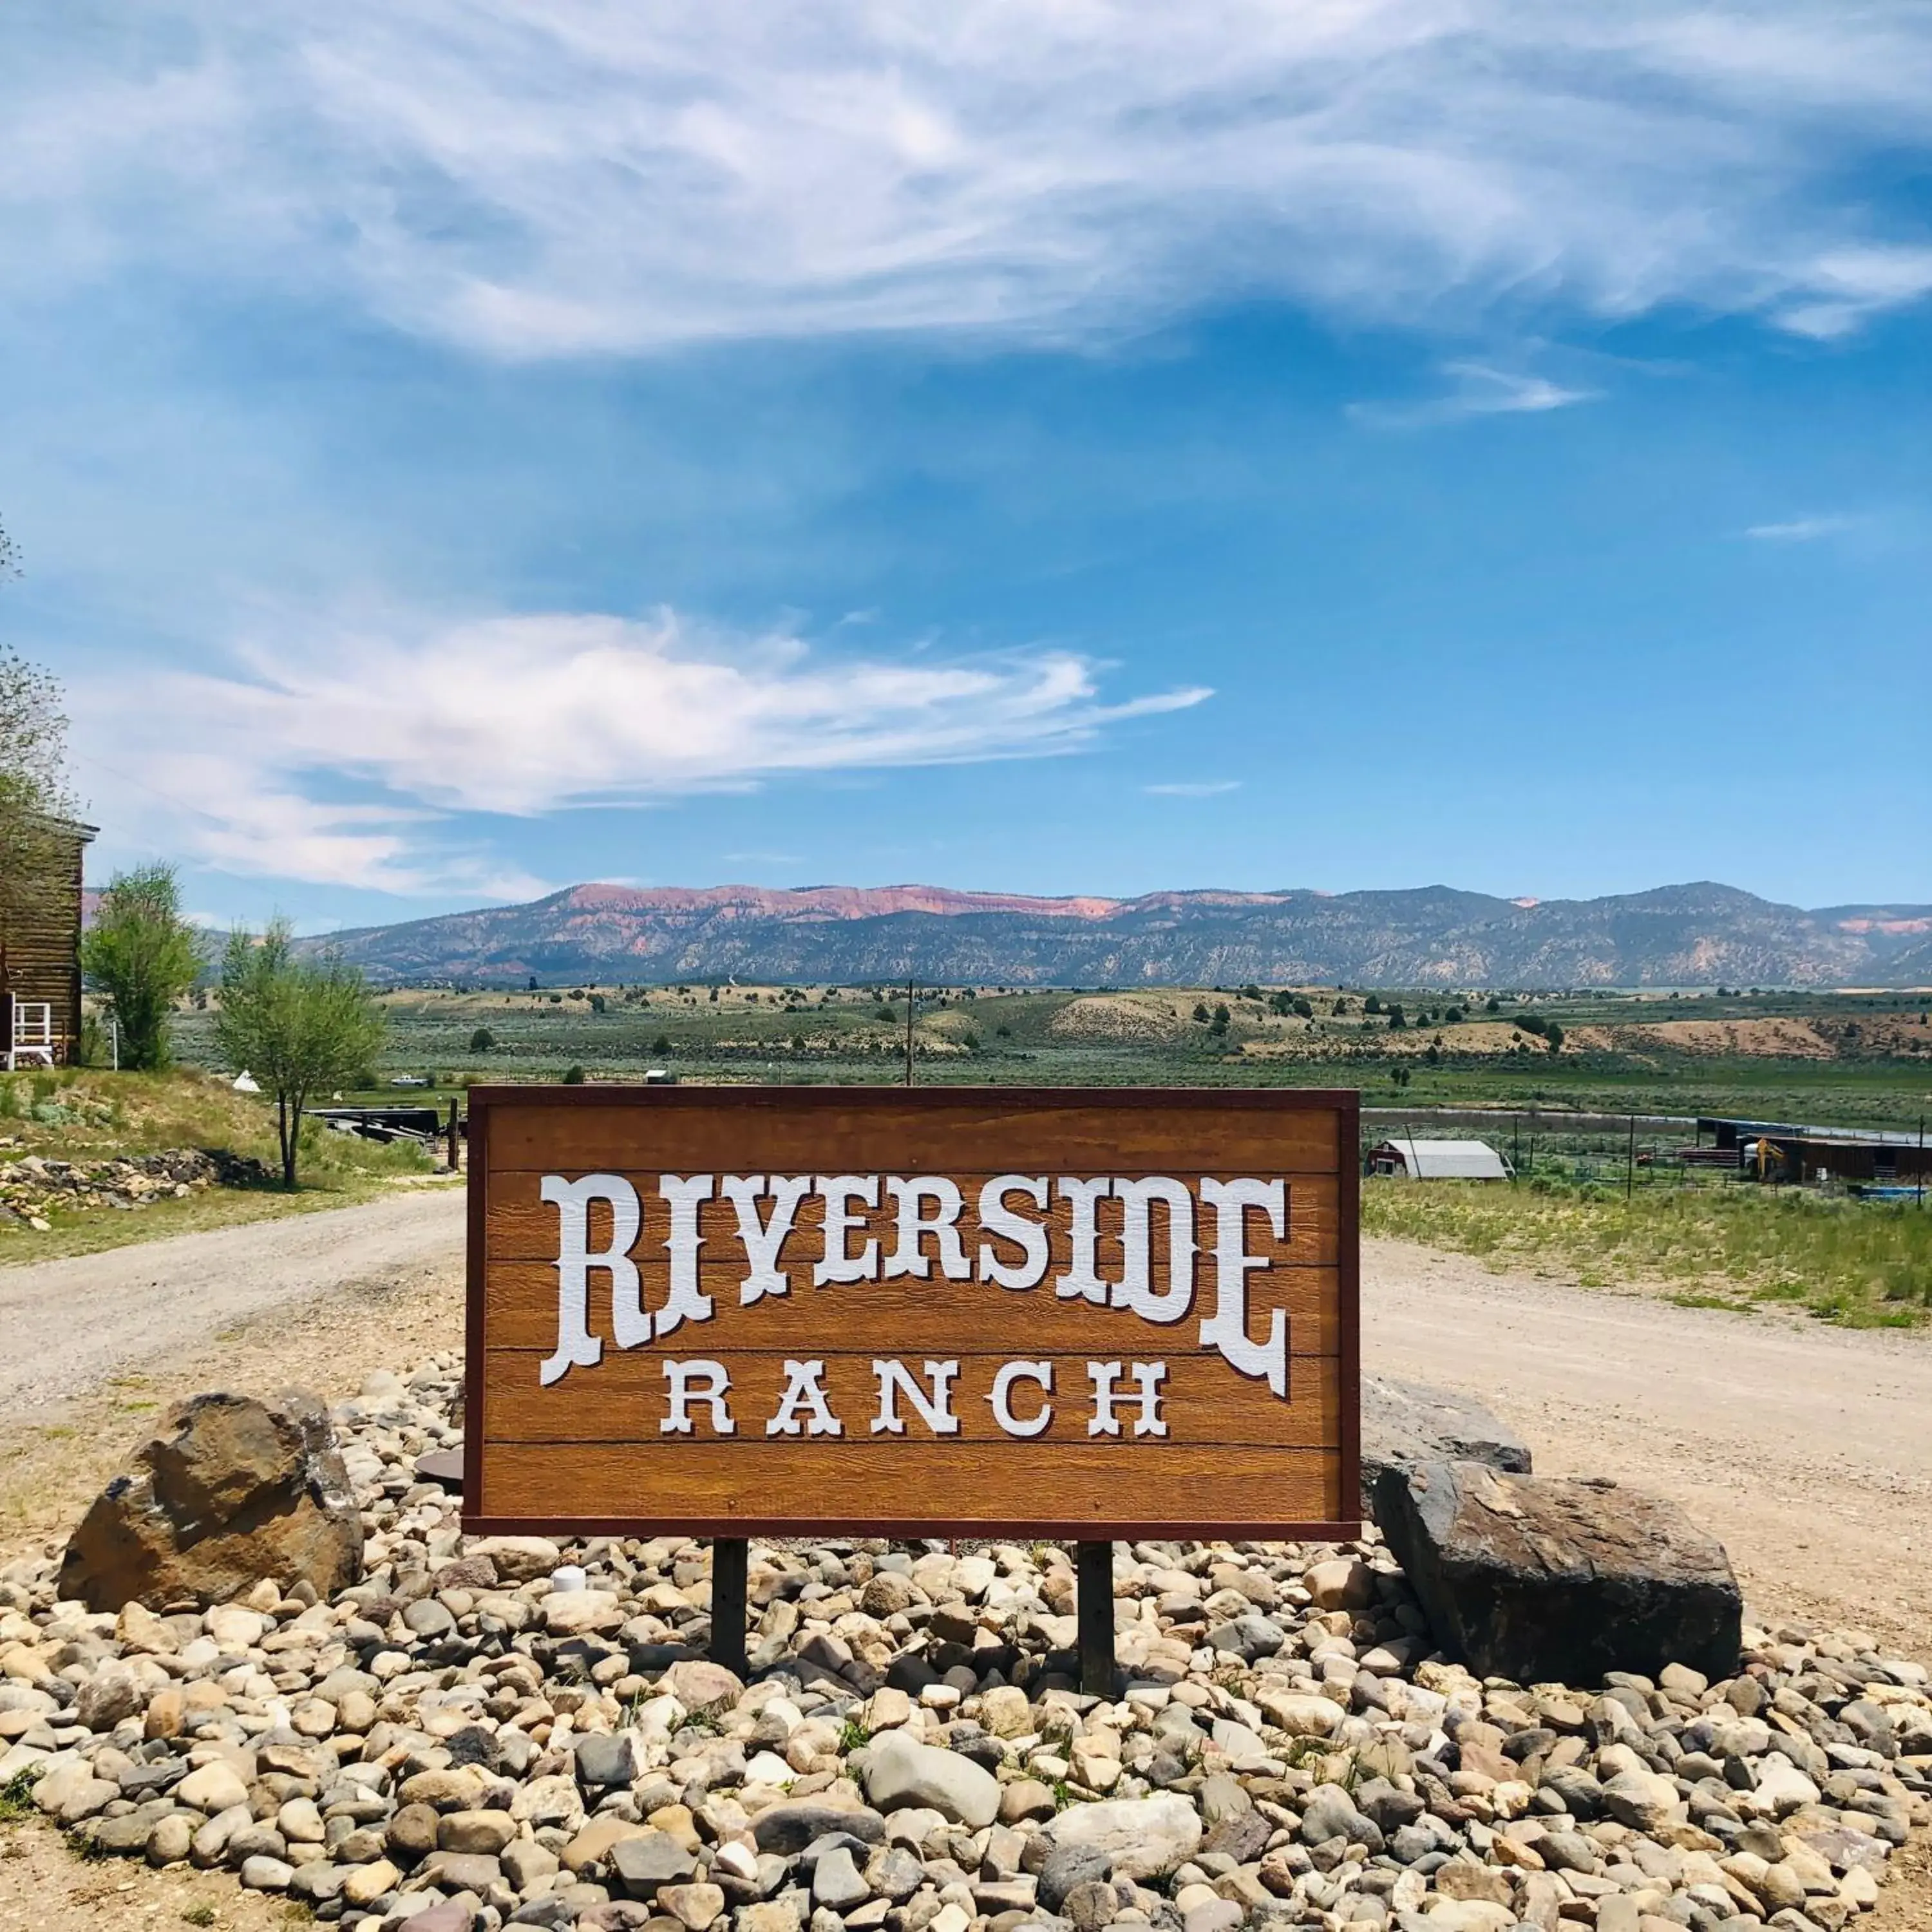 Property logo or sign in The Riverside Ranch Motel and RV Park